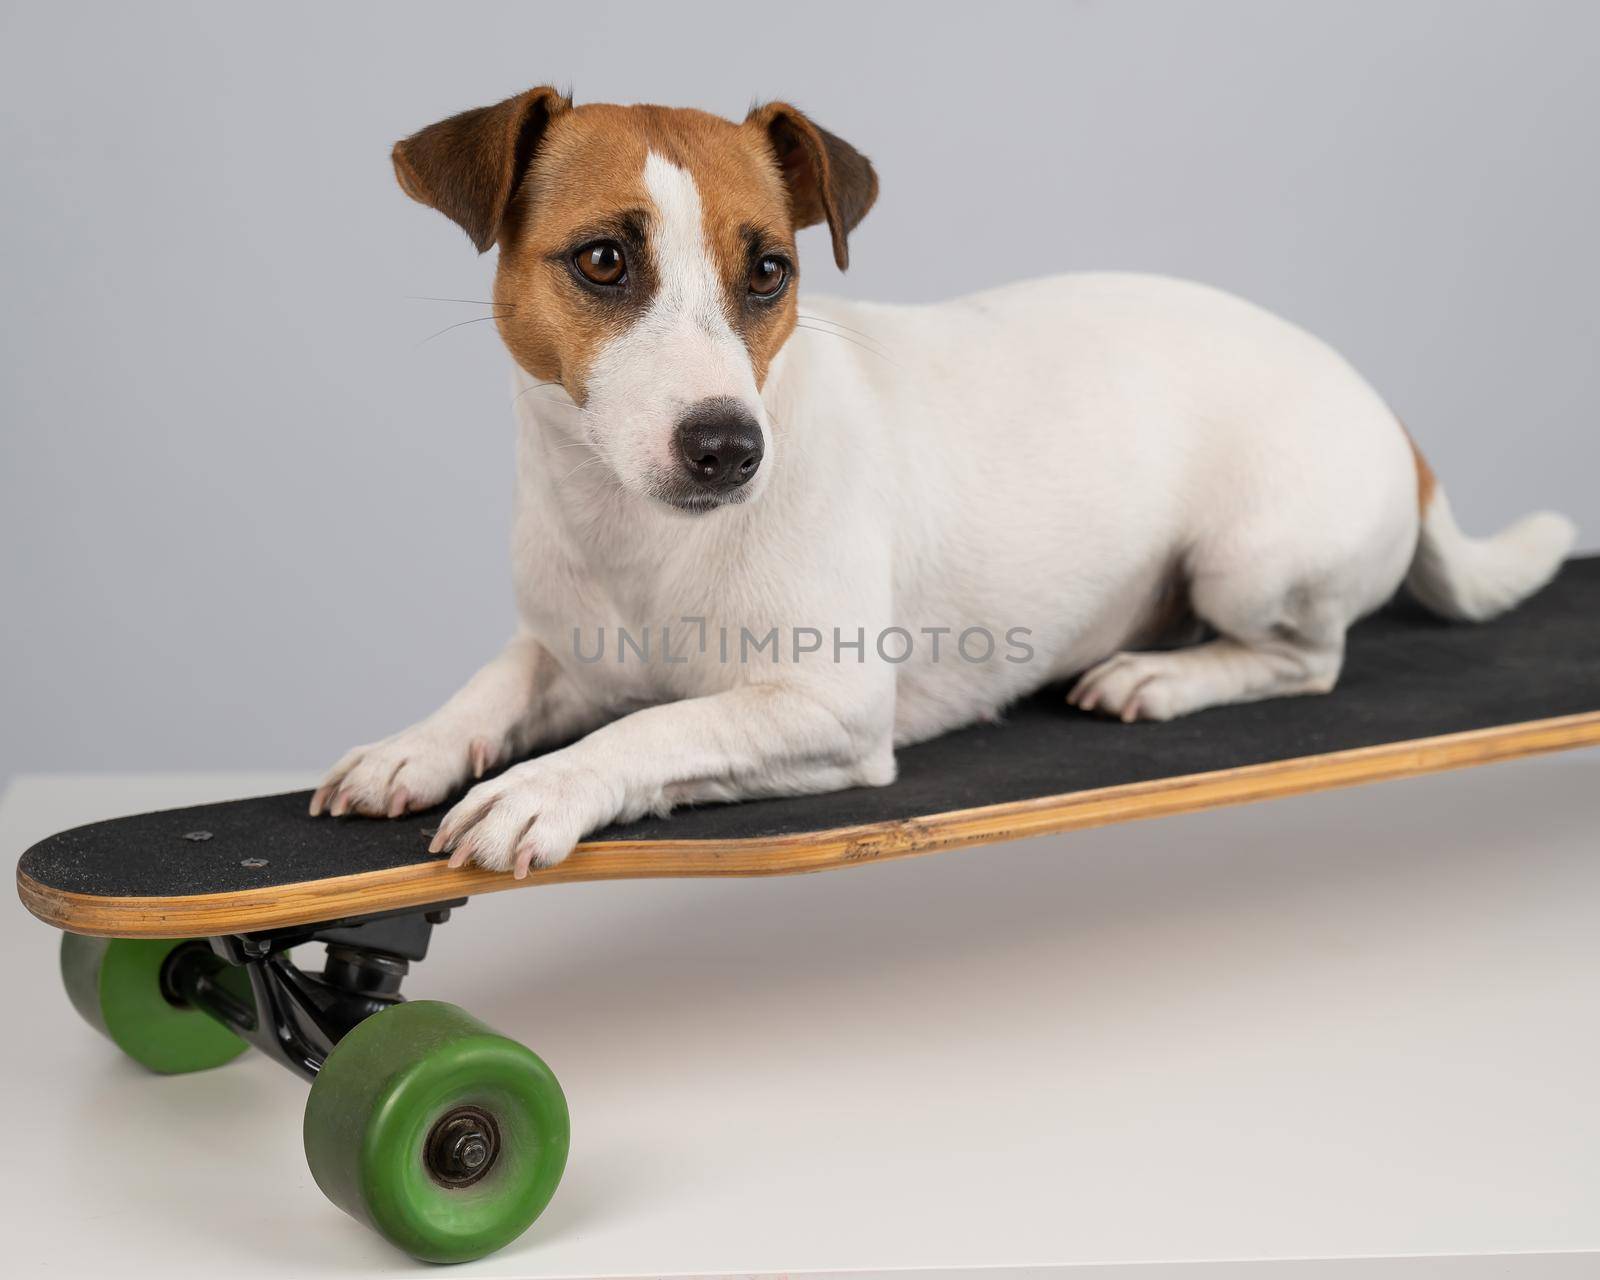 Dog jack russell terrier posing on a longboard in front of a white background